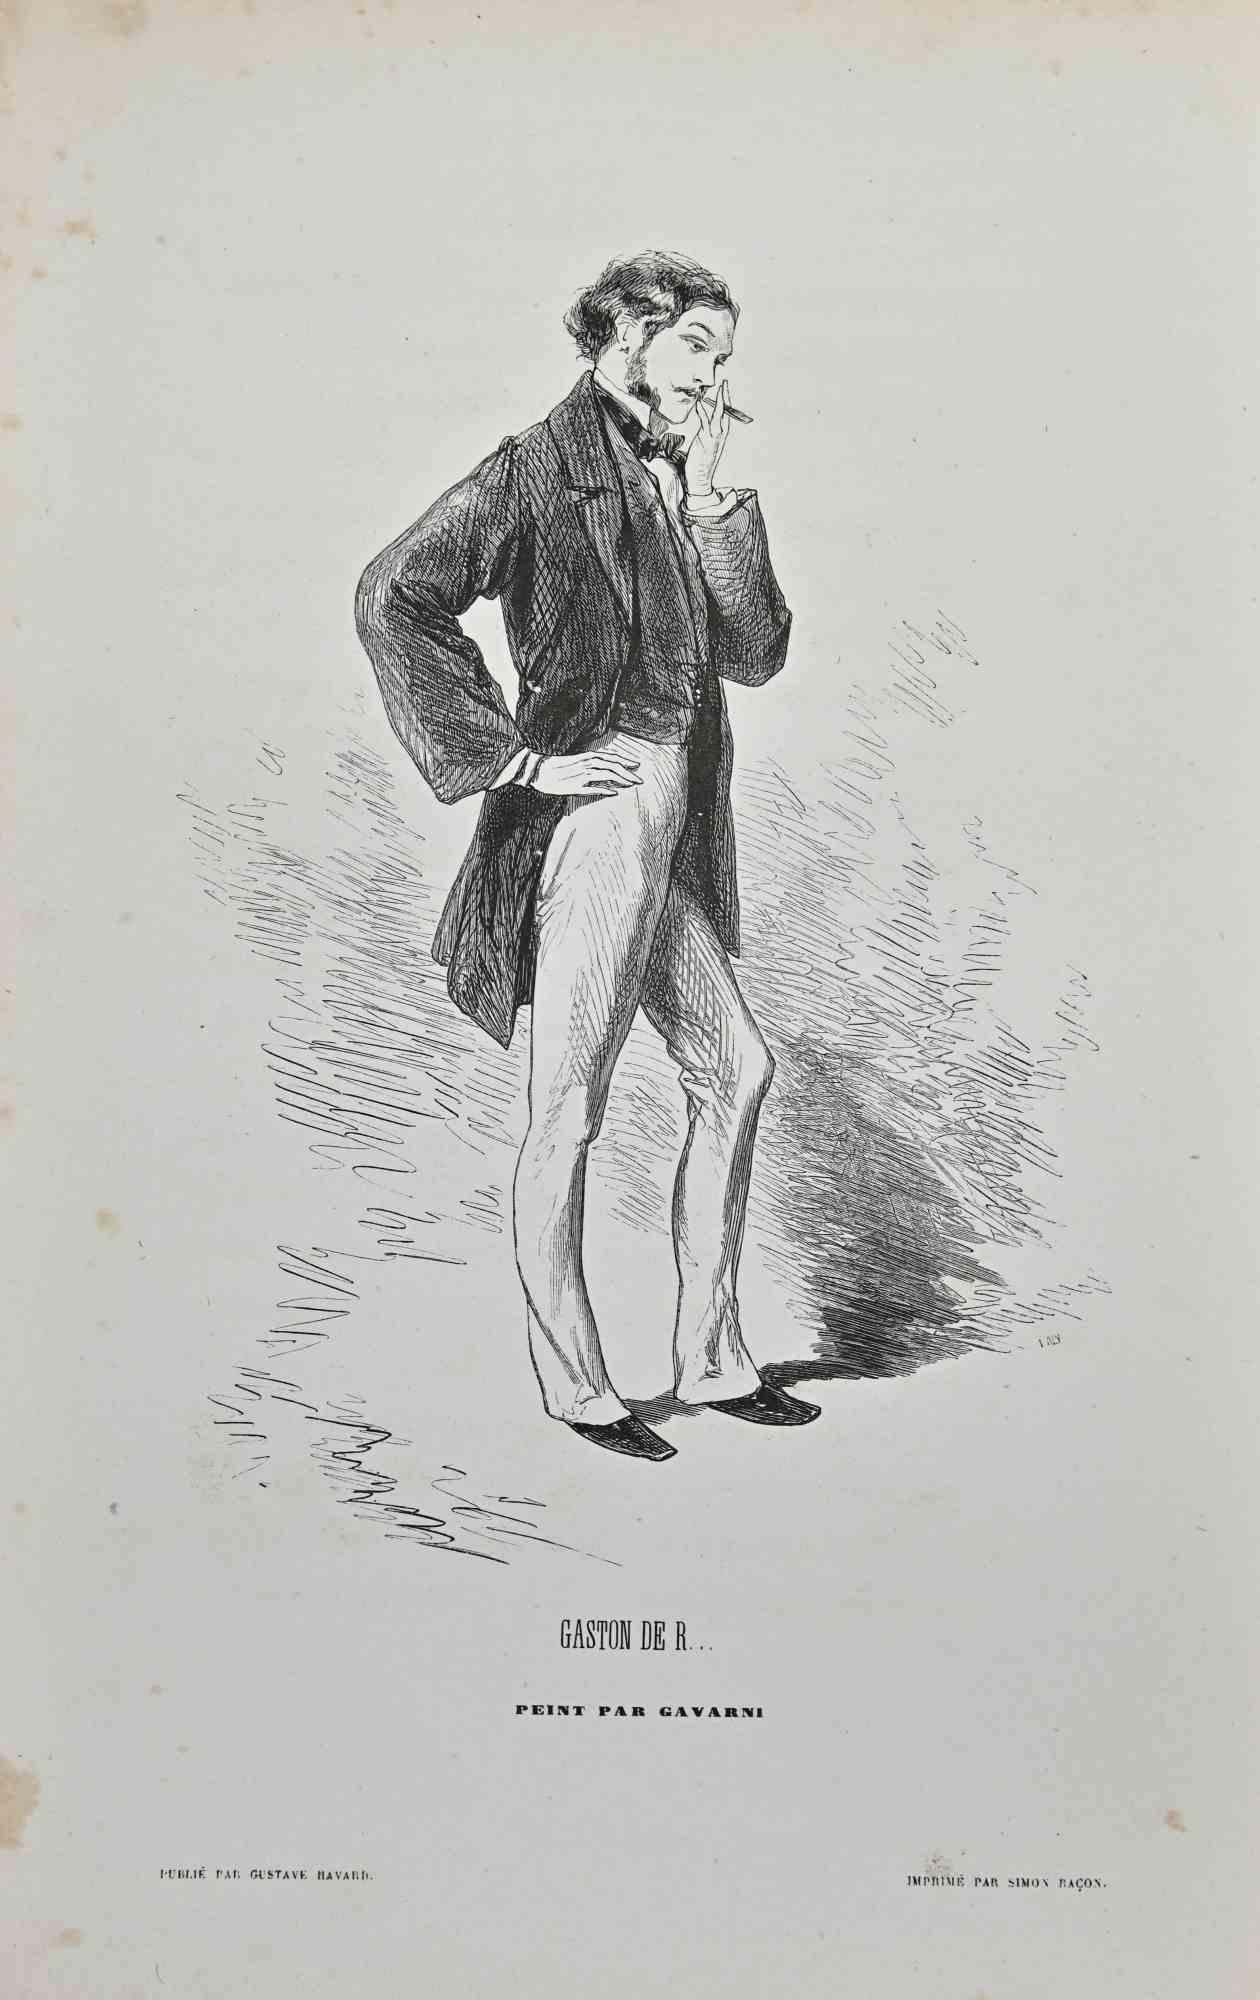 Gaston De R is a lithograph on ivory-colored paper, realized by the French draftsman Paul Gavarni (alias Guillaume Sulpice Chevalier Gavarni, 1804-1866) in the mid-19th Century.

Signed on the plate" Par Gavarni".

From series of "Masques et